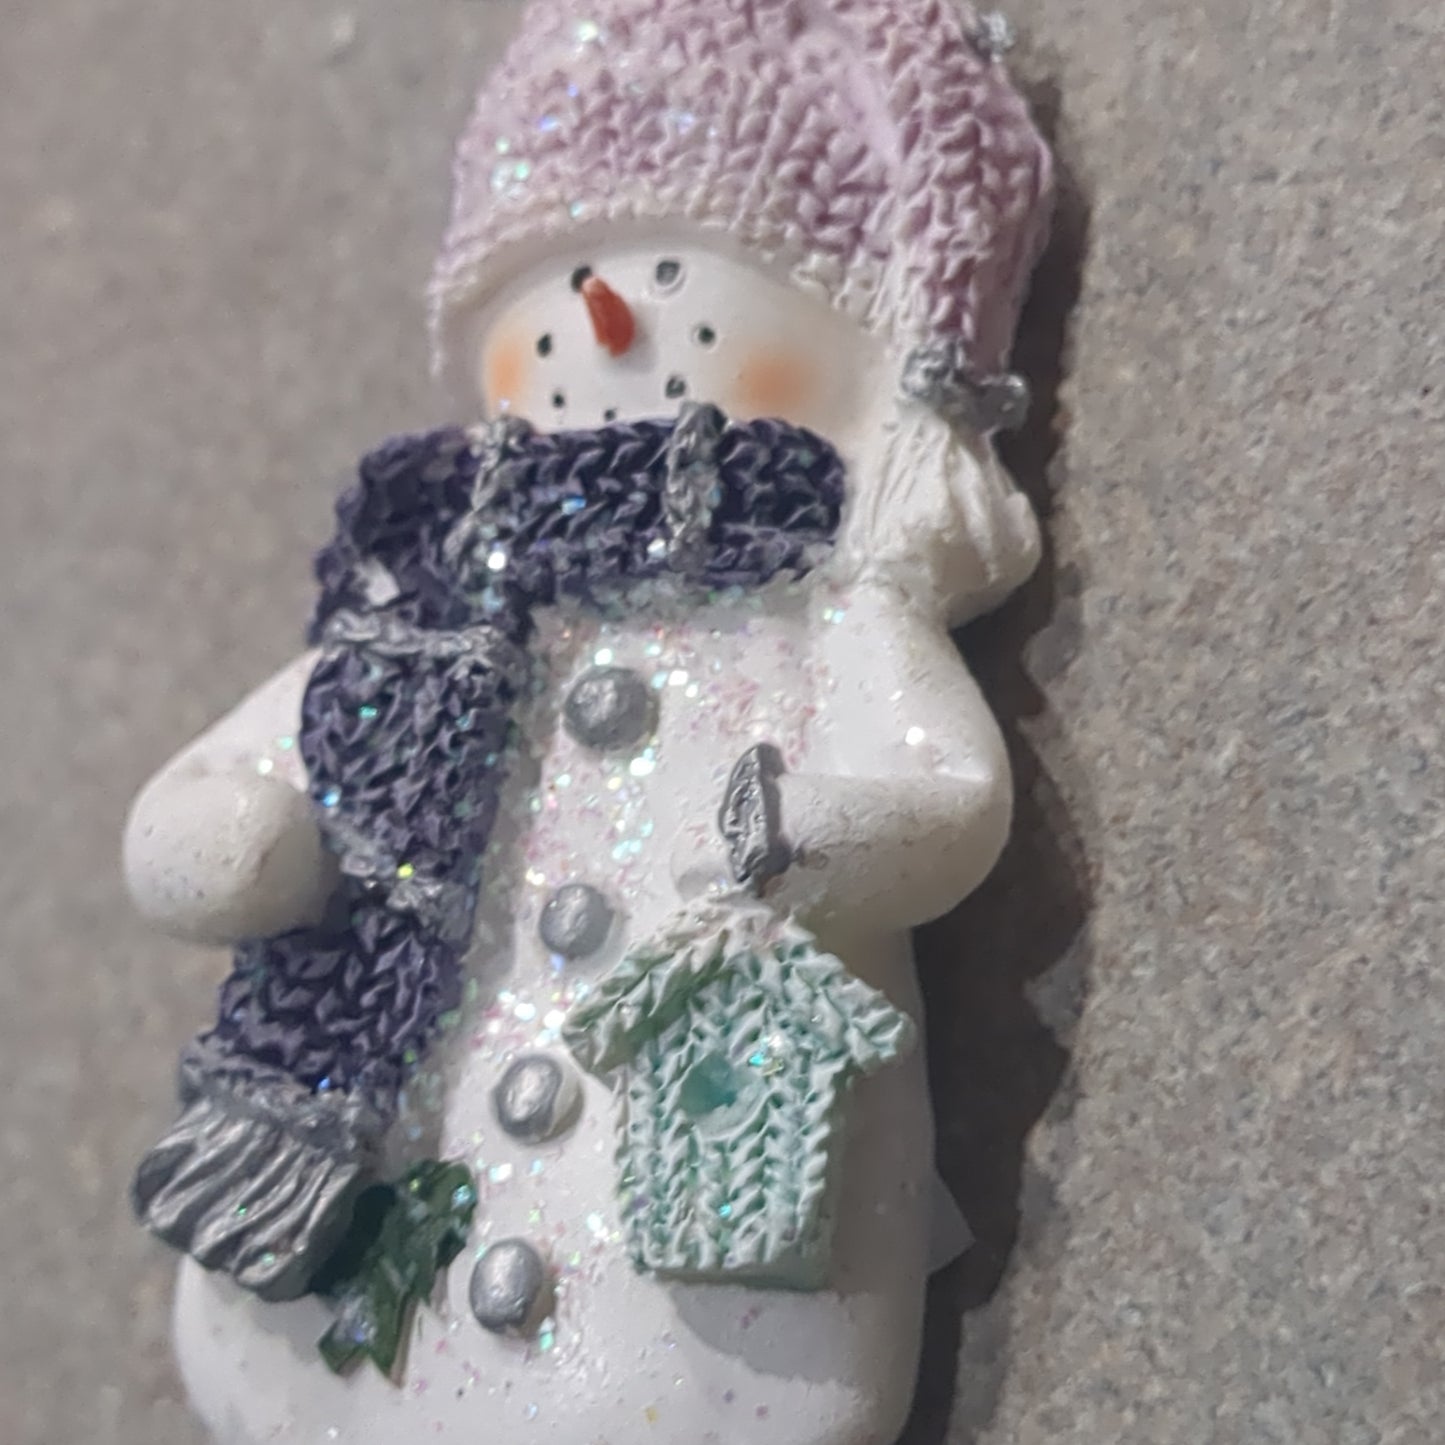 Polycrylic snowman ornament with a birdhouse lilac and purple